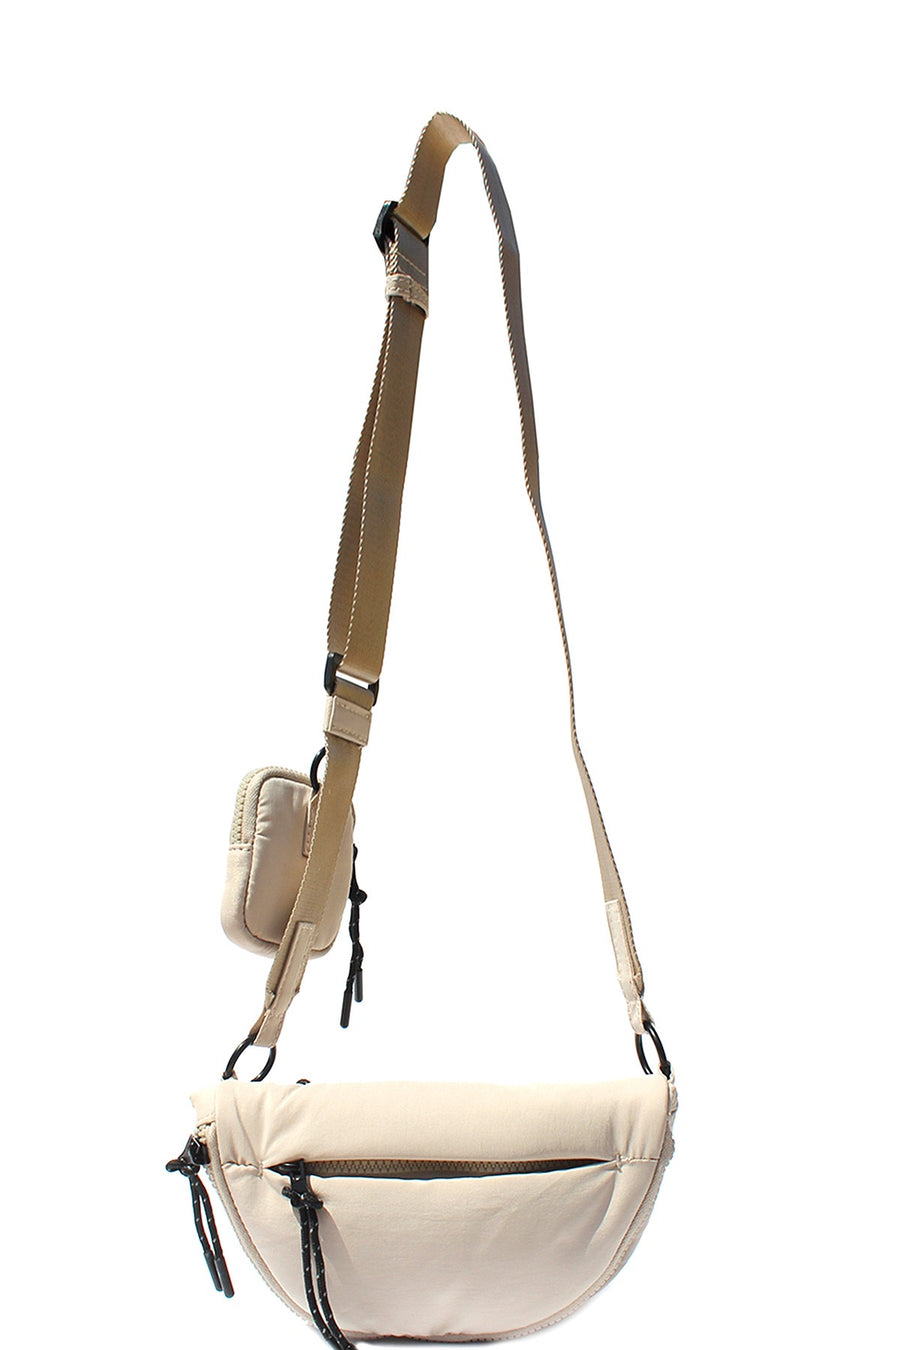 Ivory curved fanny pack.